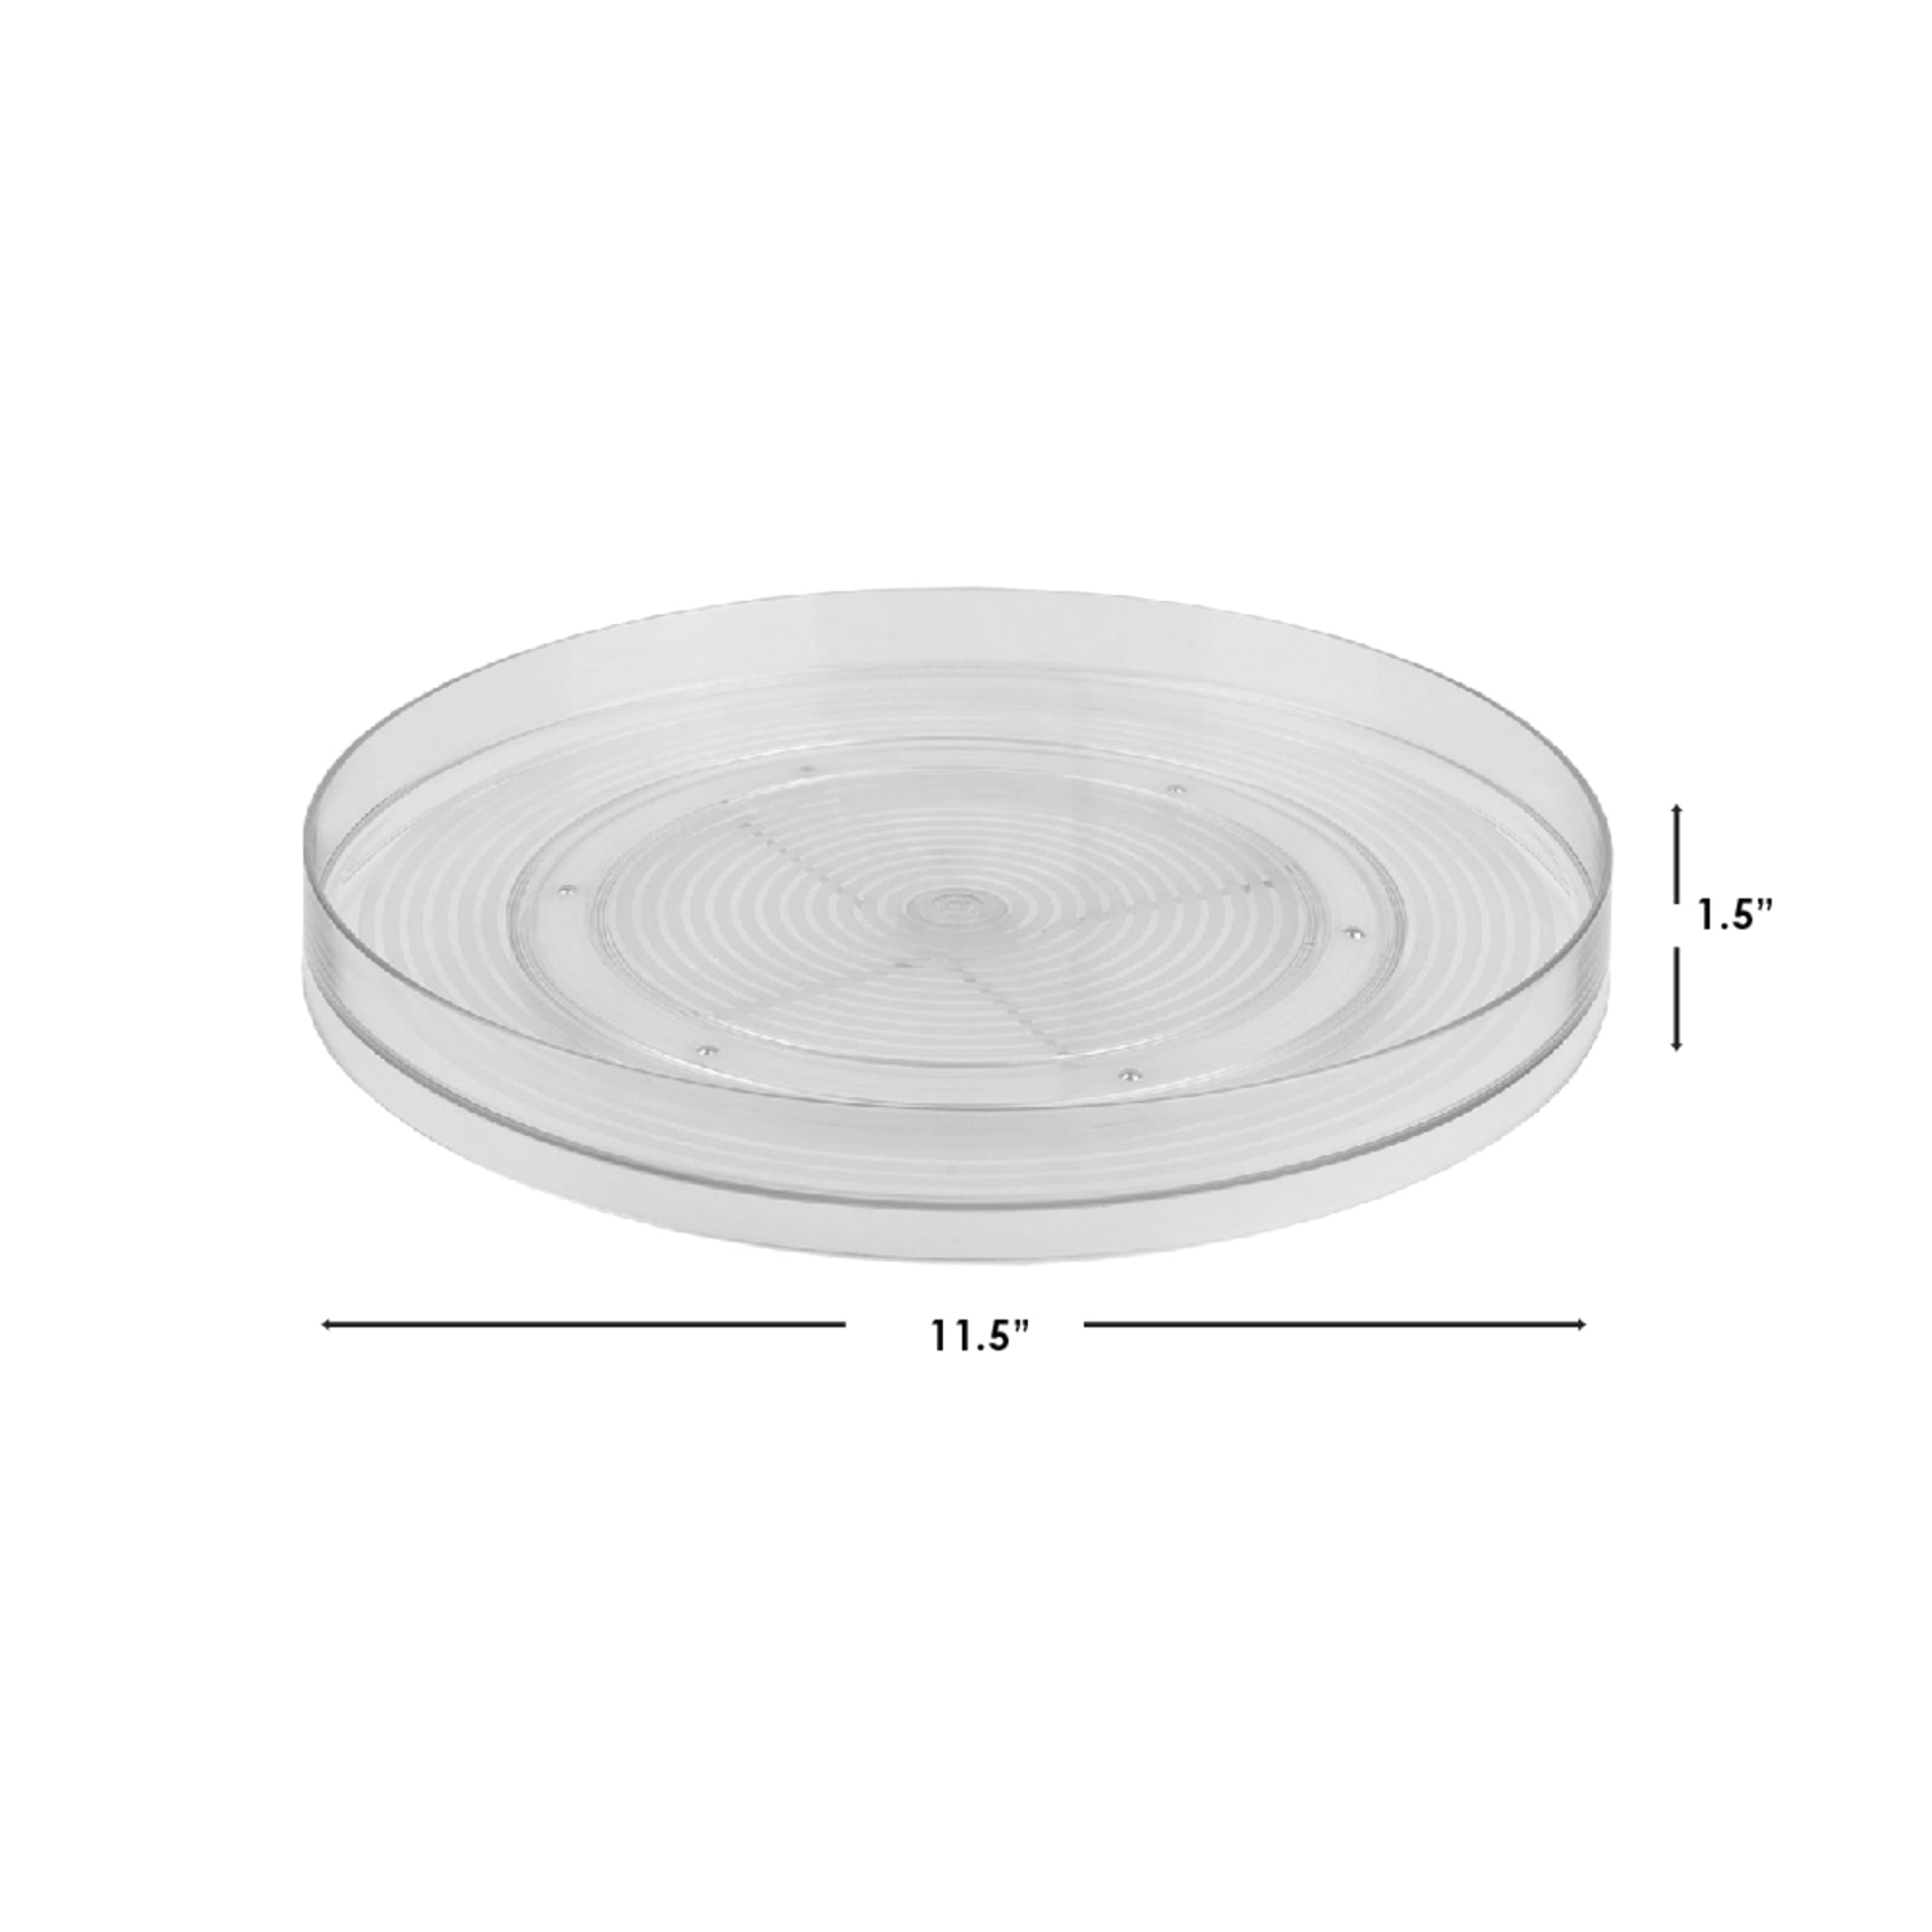 Home Basics Smooth Spin Non-Skid Plastic Lazy Susan, Clear $4.00 EACH, CASE PACK OF 12